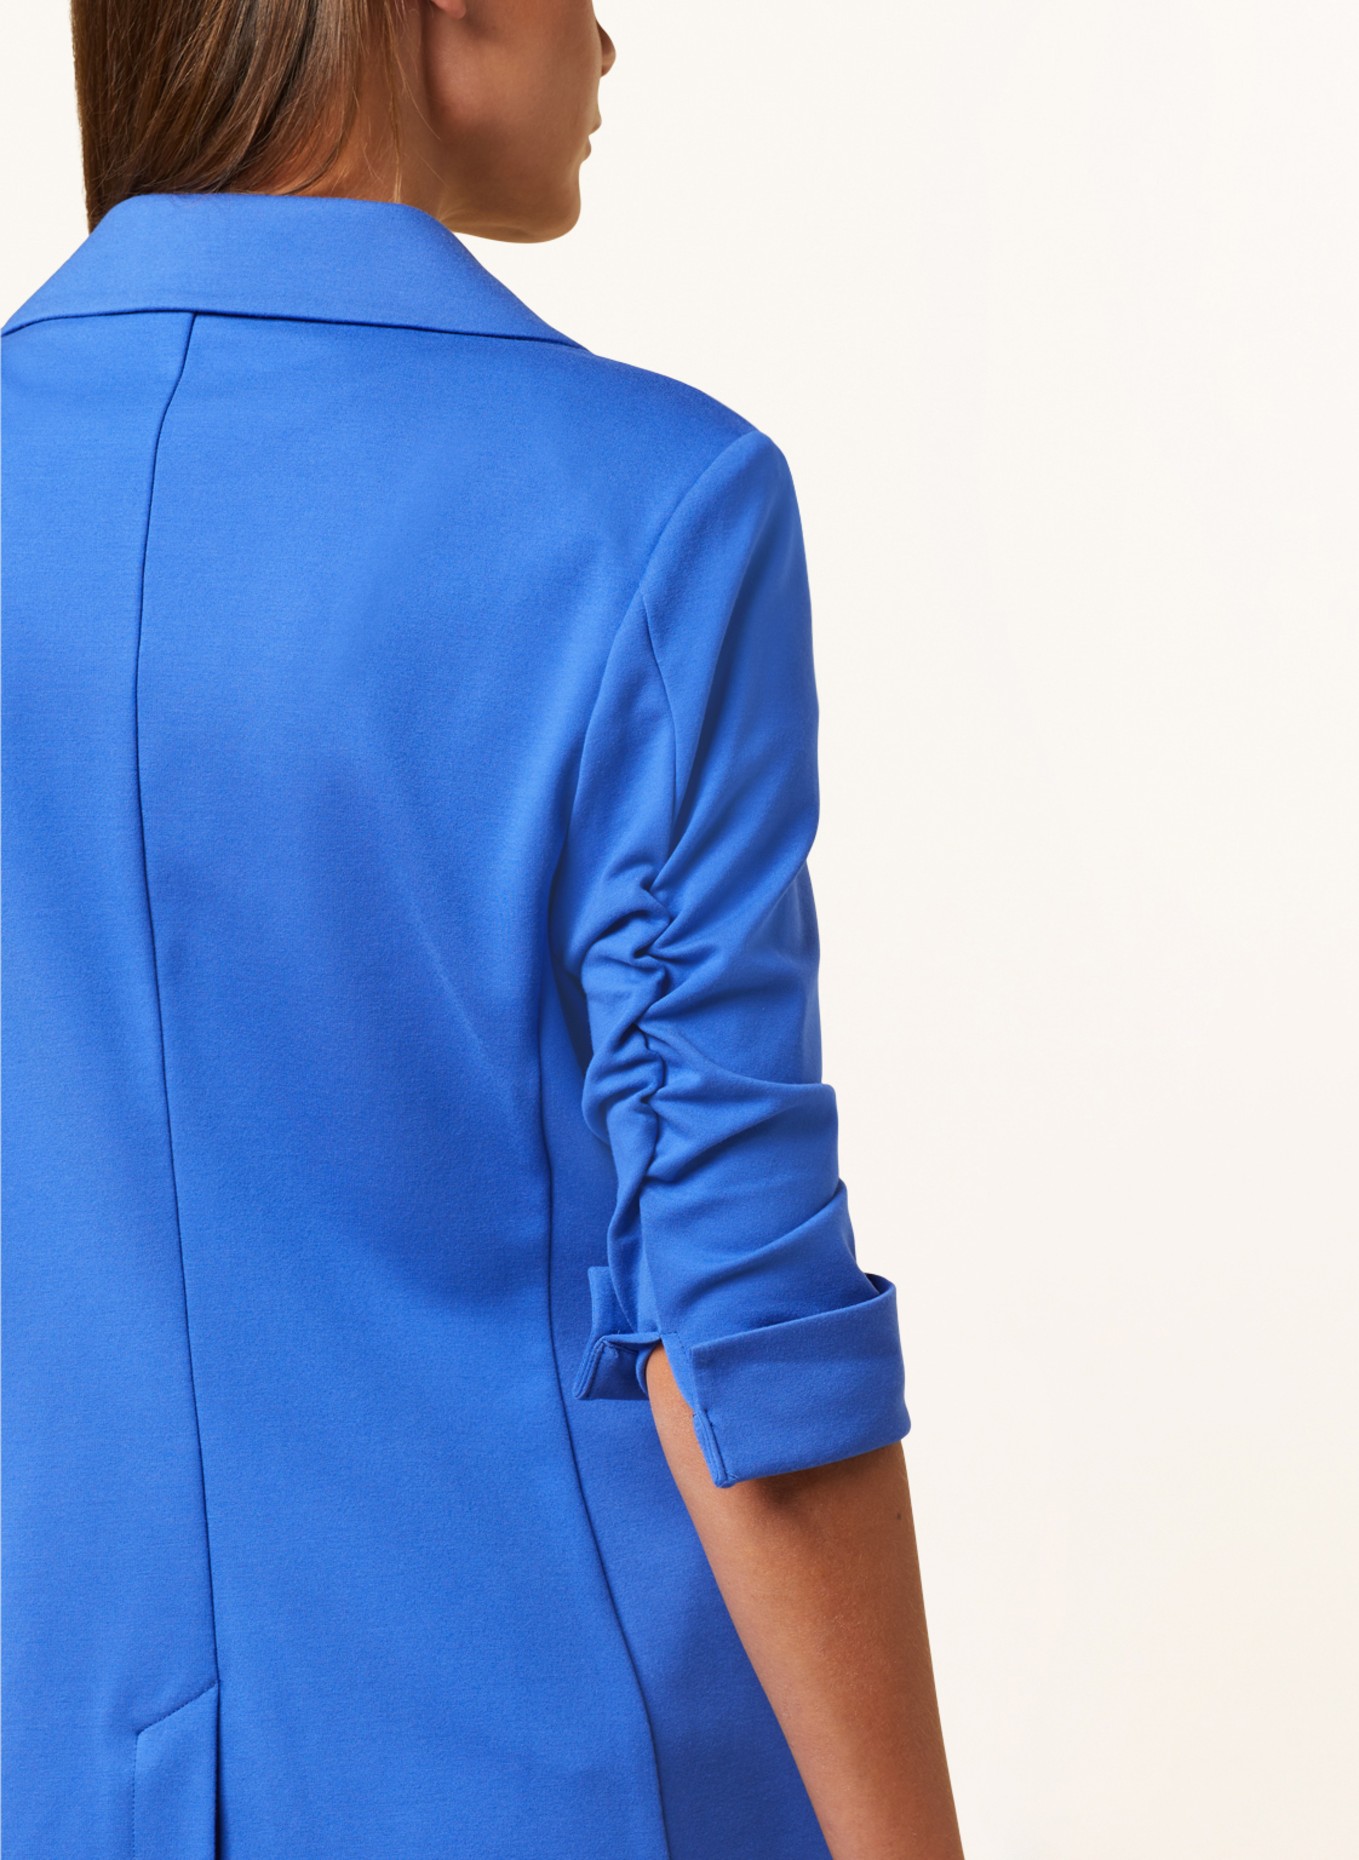 CATNOIR Jersey blazer with 3/4 sleeves, Color: BLUE (Image 4)